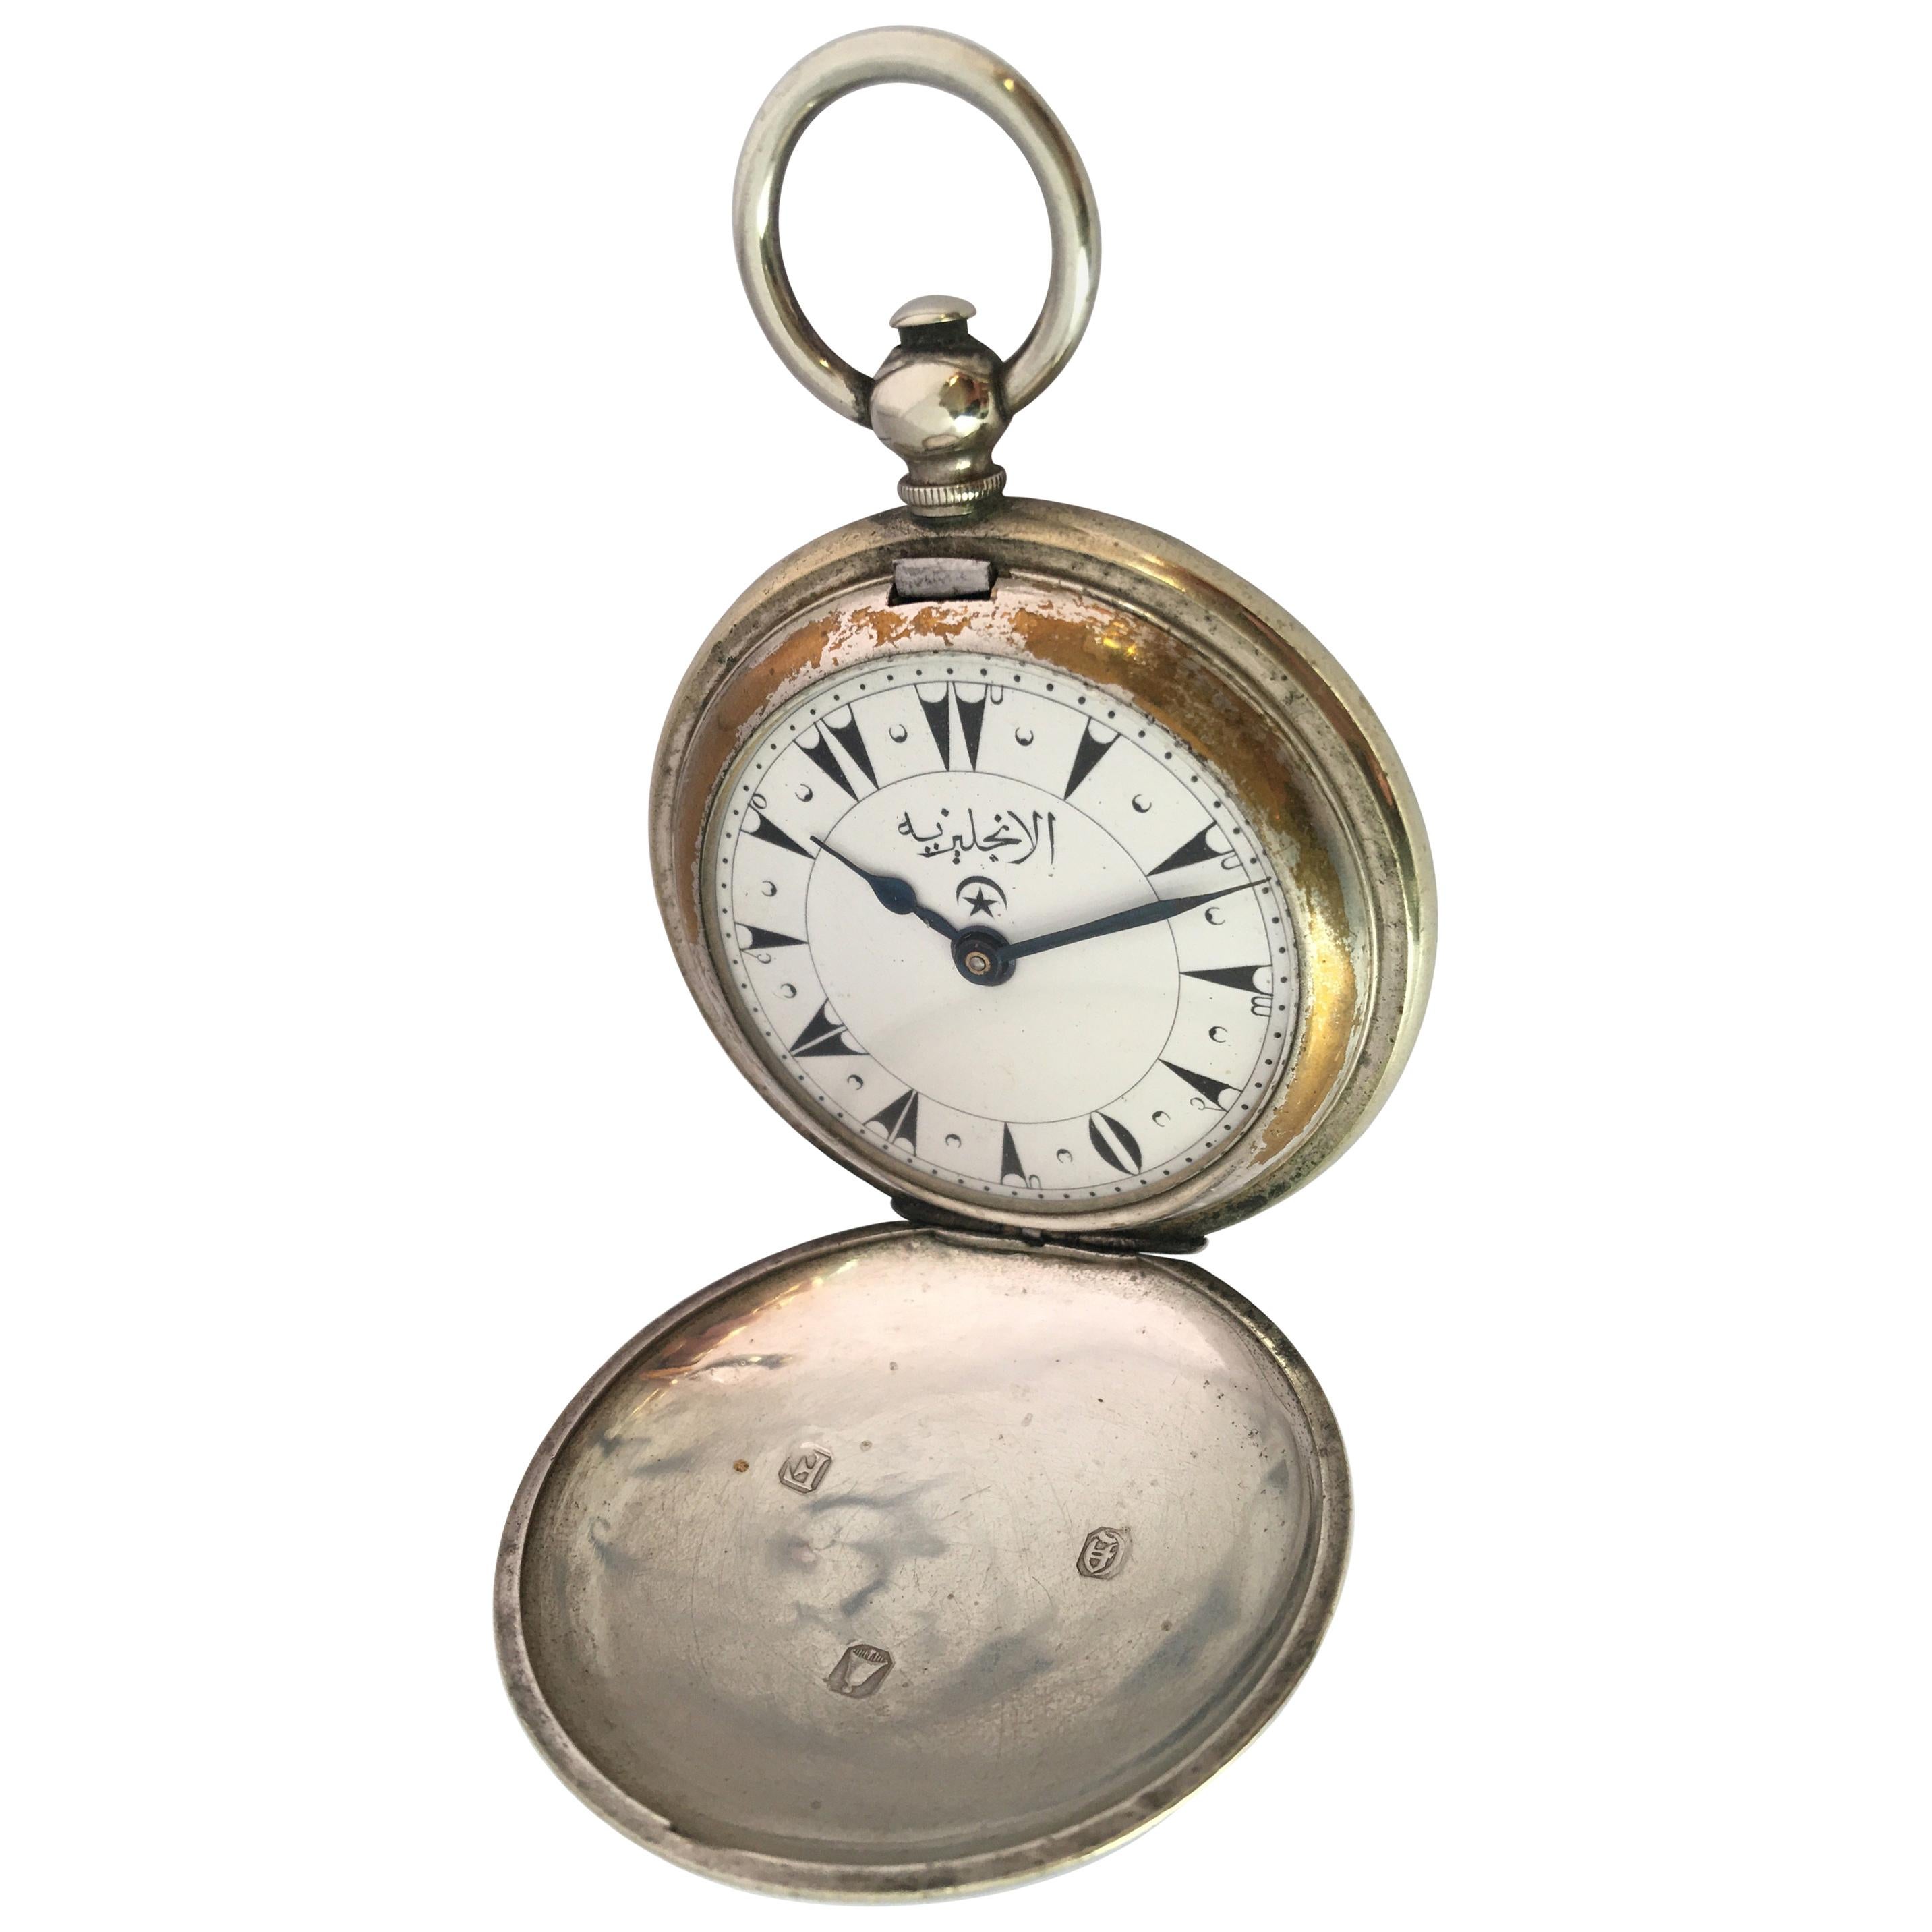 Nickel cased hunter pocket watch for the Turkish market, unsigned movement, the dial with Turkish numerals and blued steel hands, engine turned case, 54mm. 

This watch is in good working condition and it is ticking well. Visible signs of ageing and